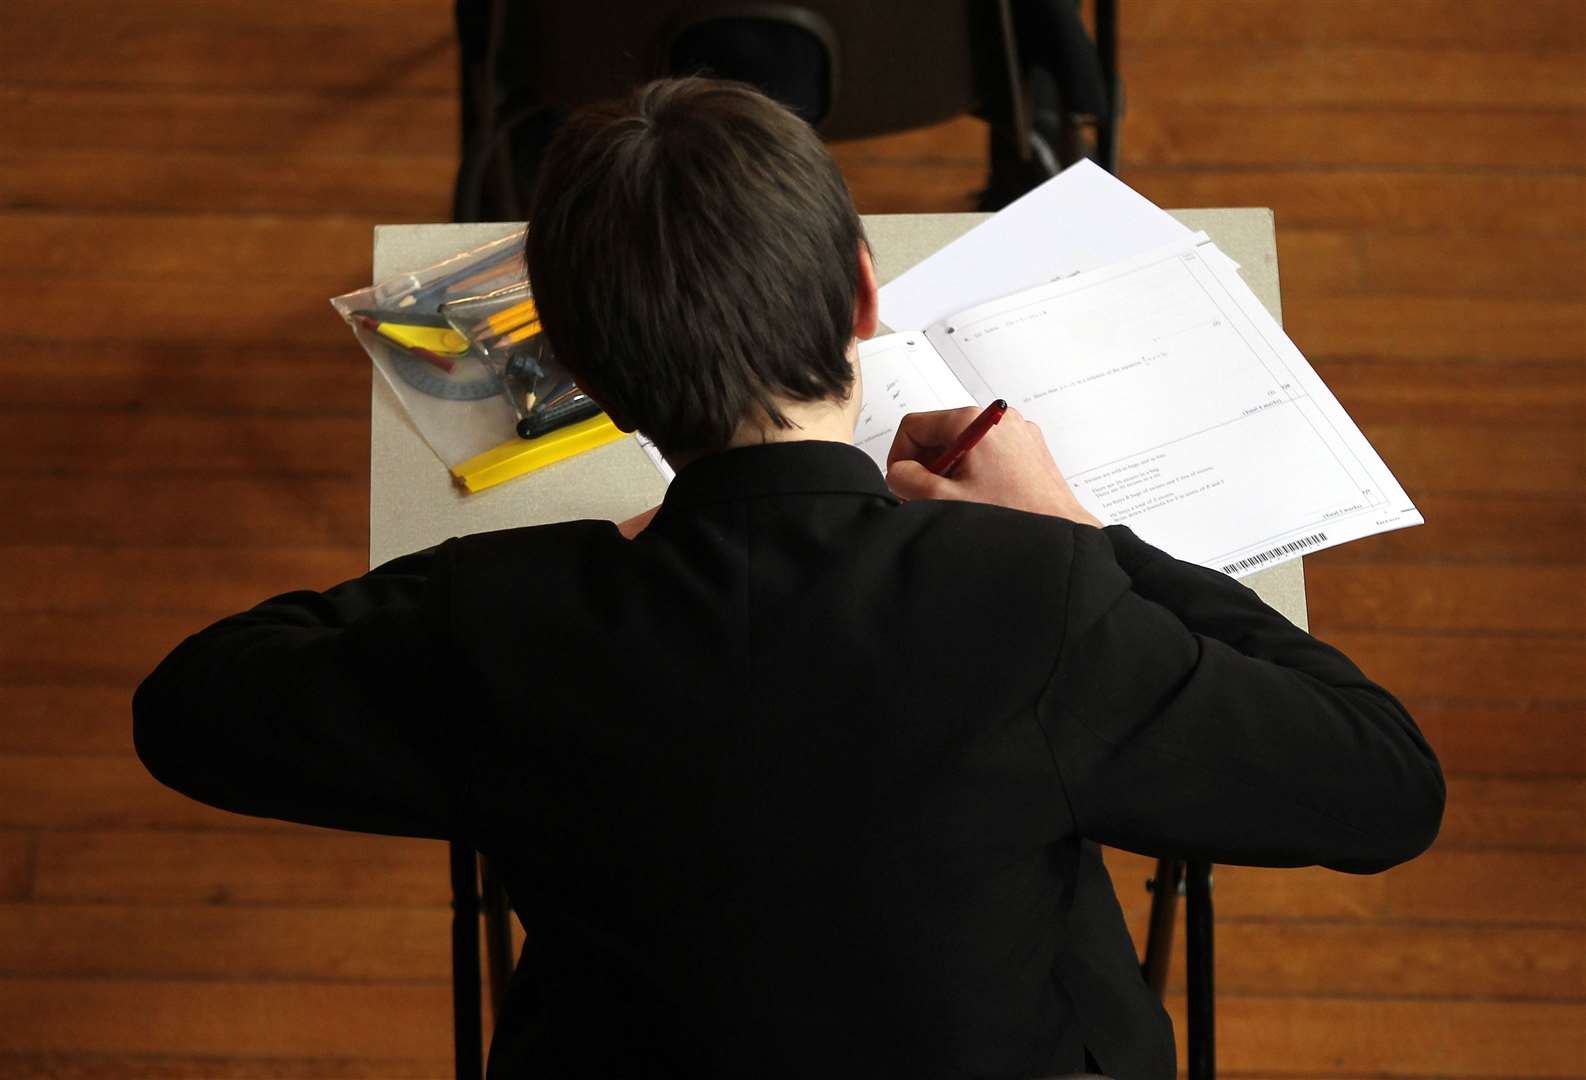 The schools are ranked by examination results. Stock image